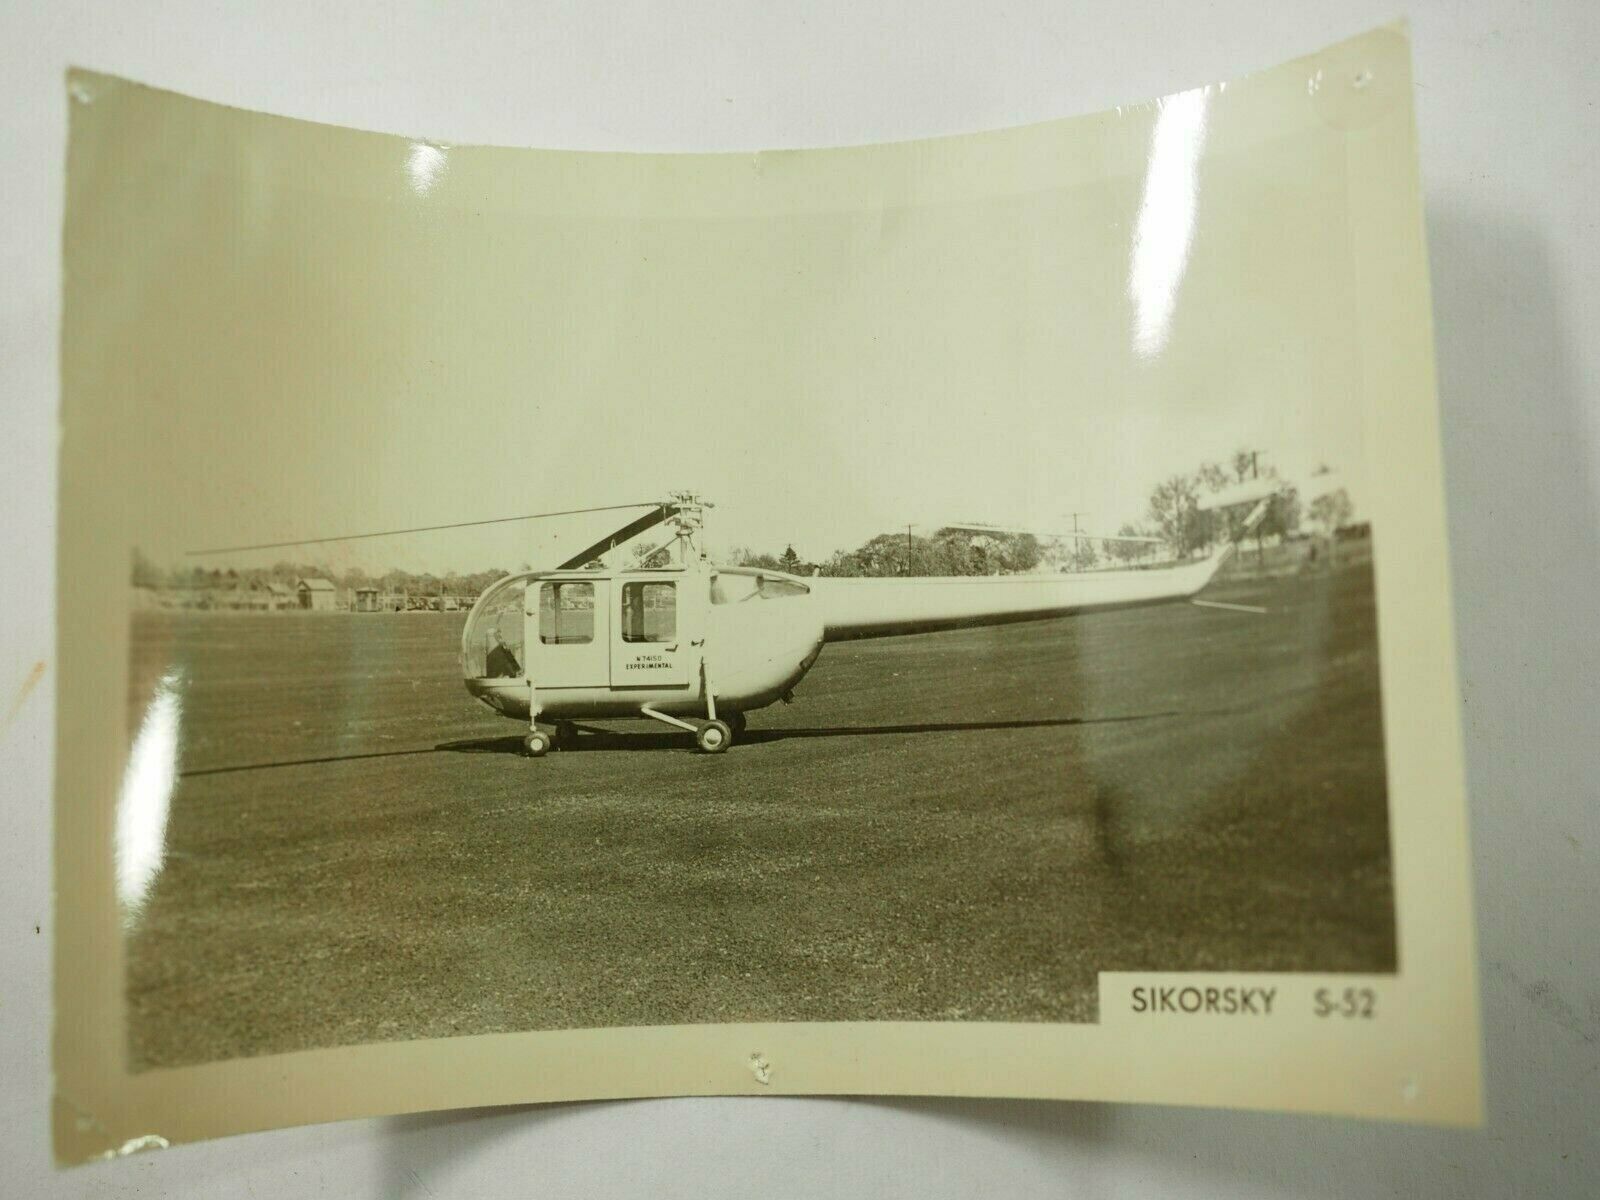 Sikorsky S-52 from Aeroplane Photo Supply Collection B&W